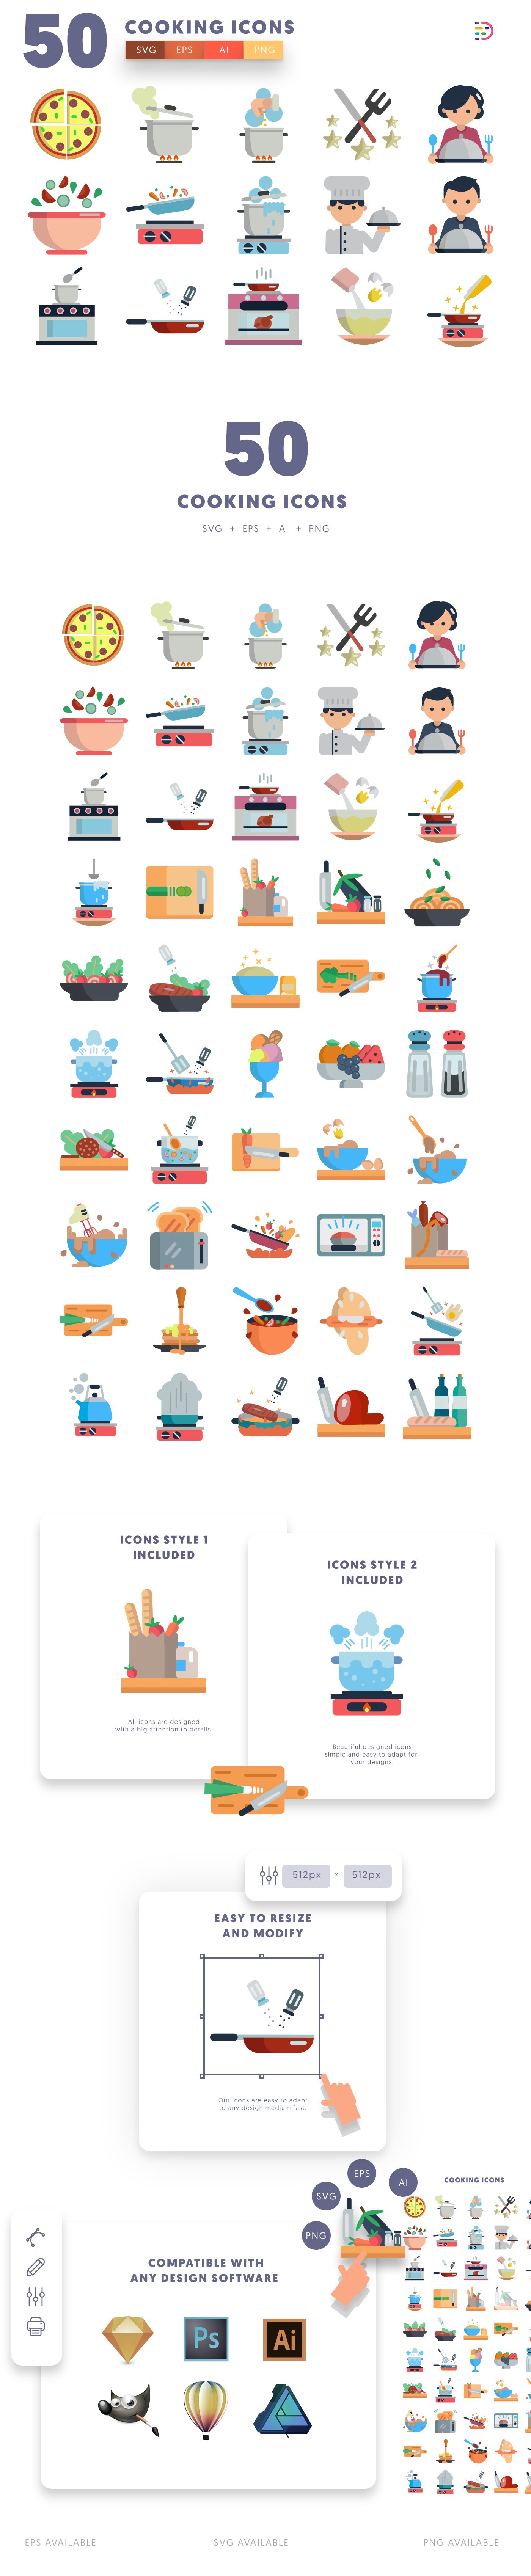 Editable cooking icons icon pack, easy to edit and customize icons